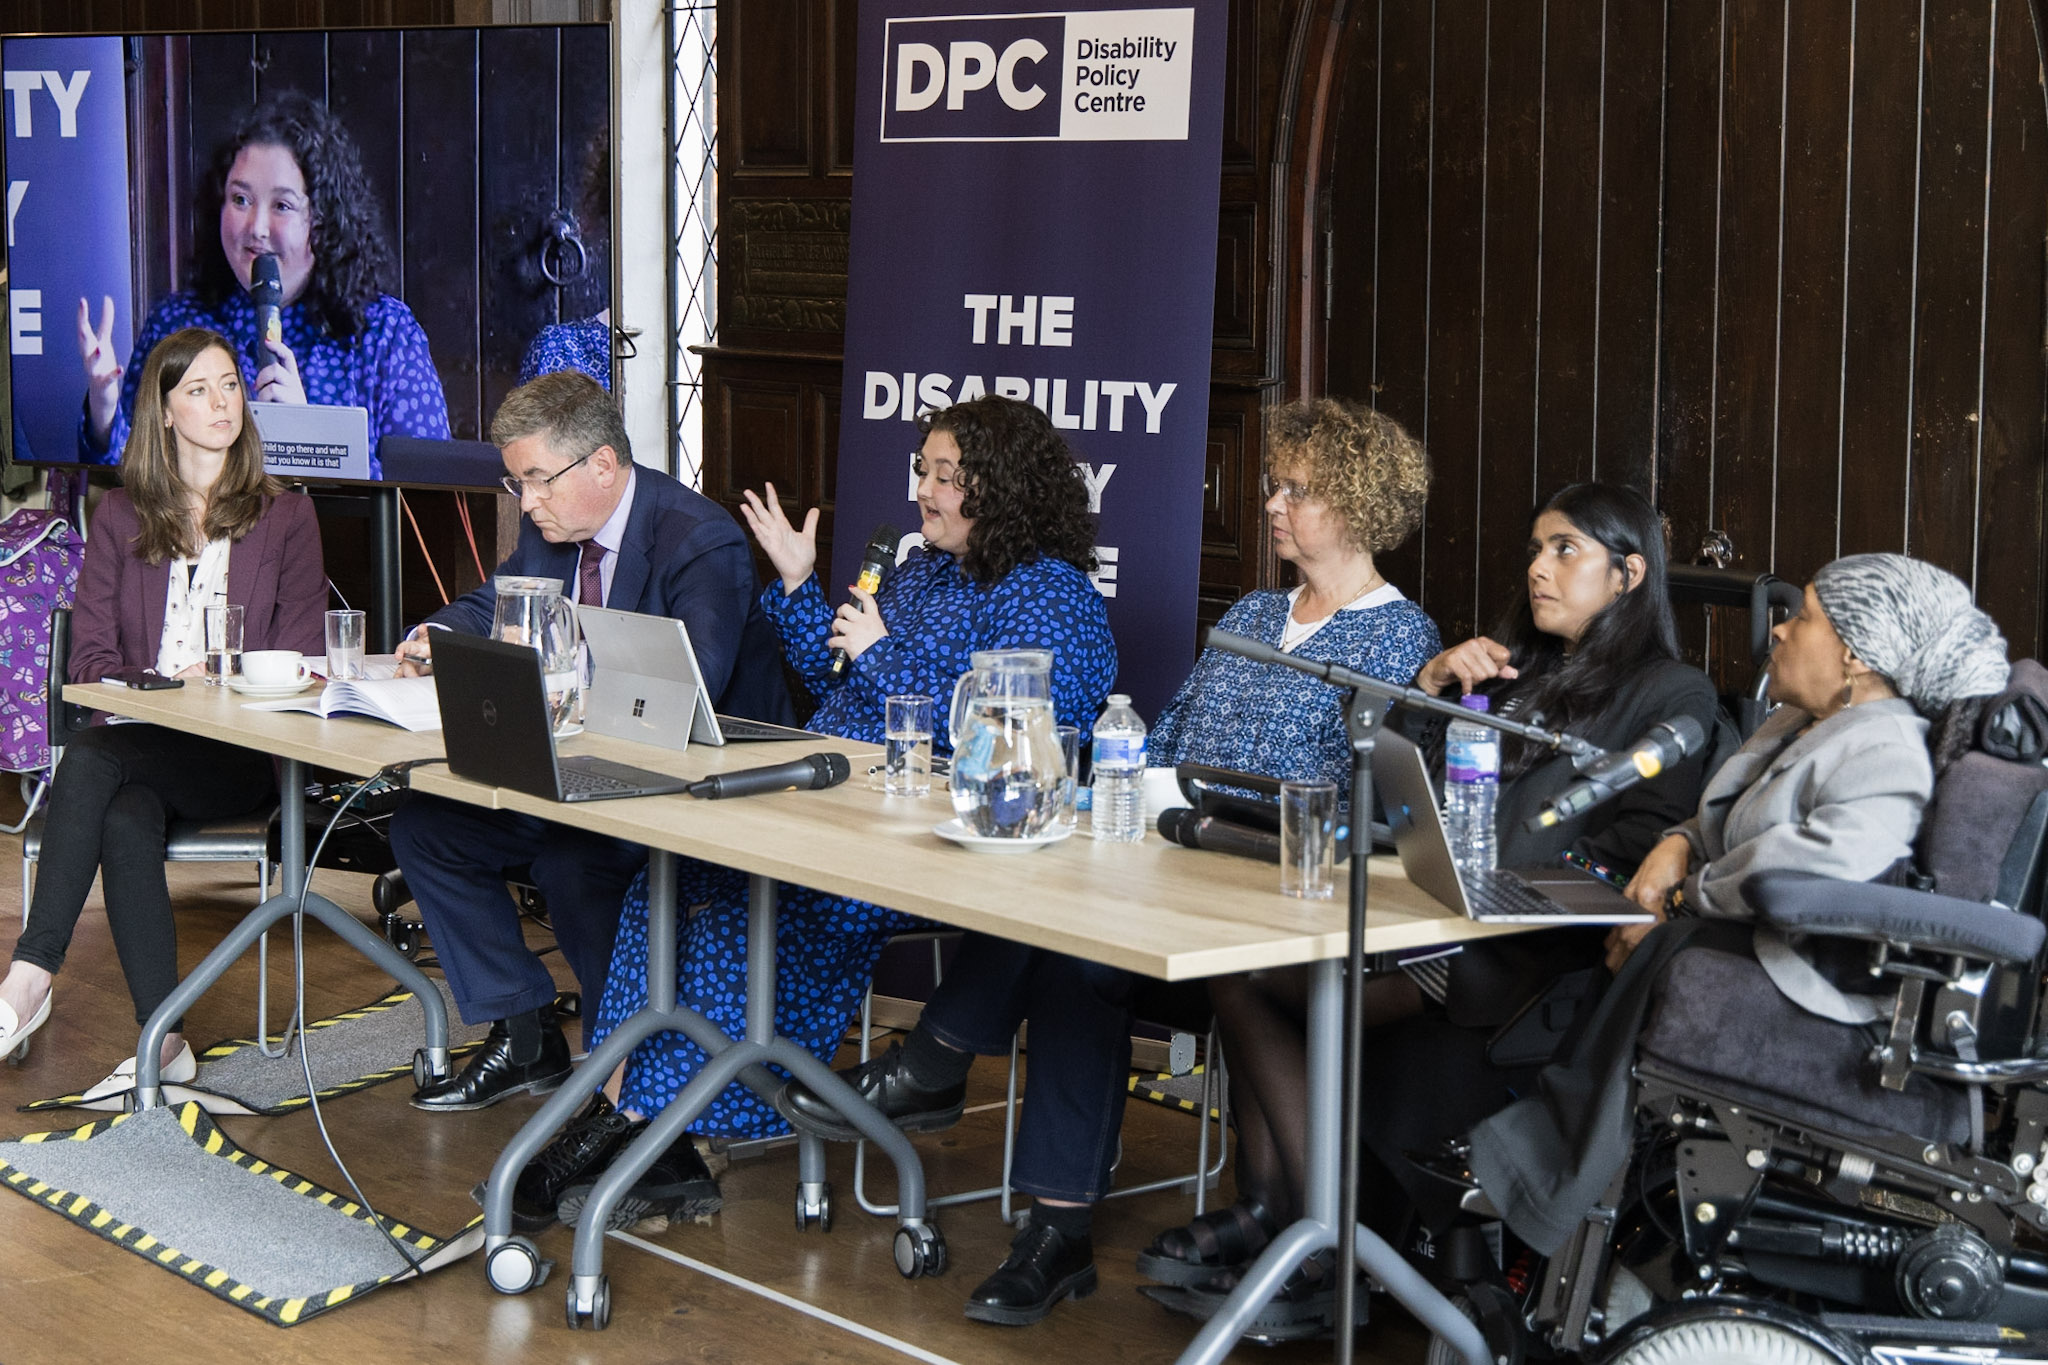 Panel of speakers at the MEI-DPC event on 22 May. From left-to-right, it shows Chloe Schendel-Wilson, Sir Robert Buckland, Bethany Pale, Nicole Brown, Bal Deol, and Michelle Daley sitting at a table against a dark wooden background in the Lecture Hall at Toynbee Hall.